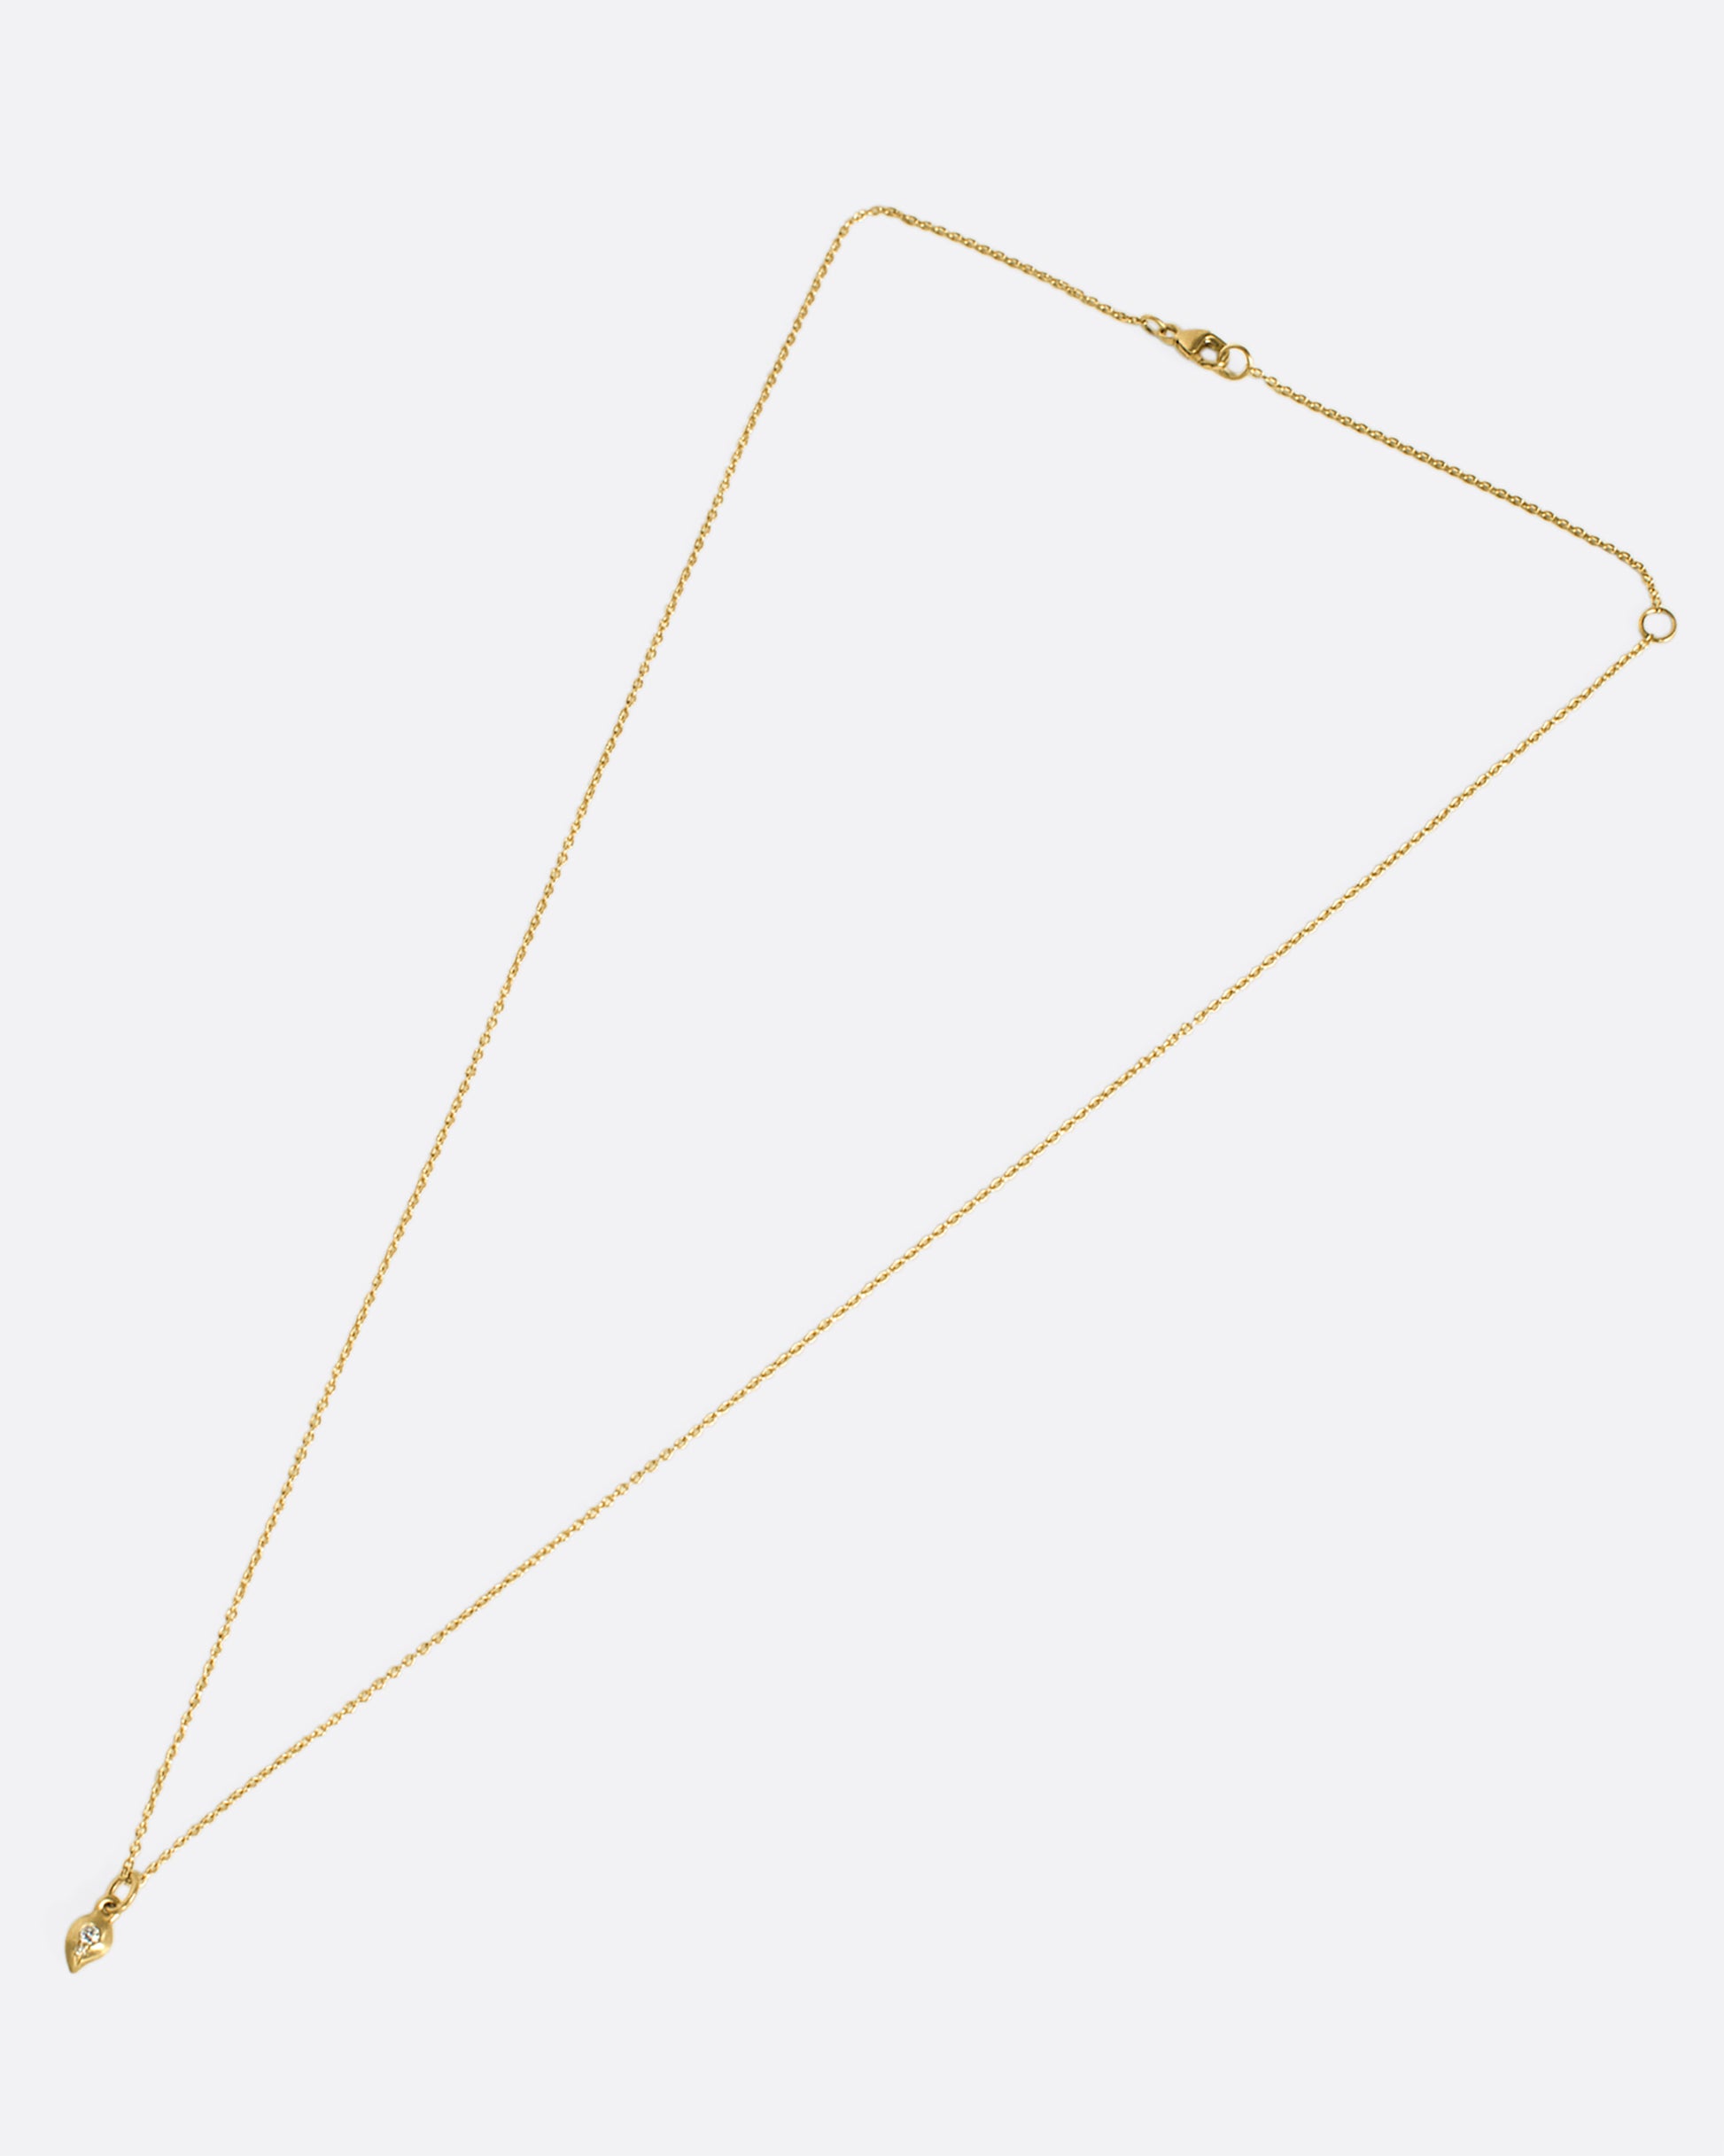 This delicate 10k gold necklace features two diamonds sparkling in a gold droplet